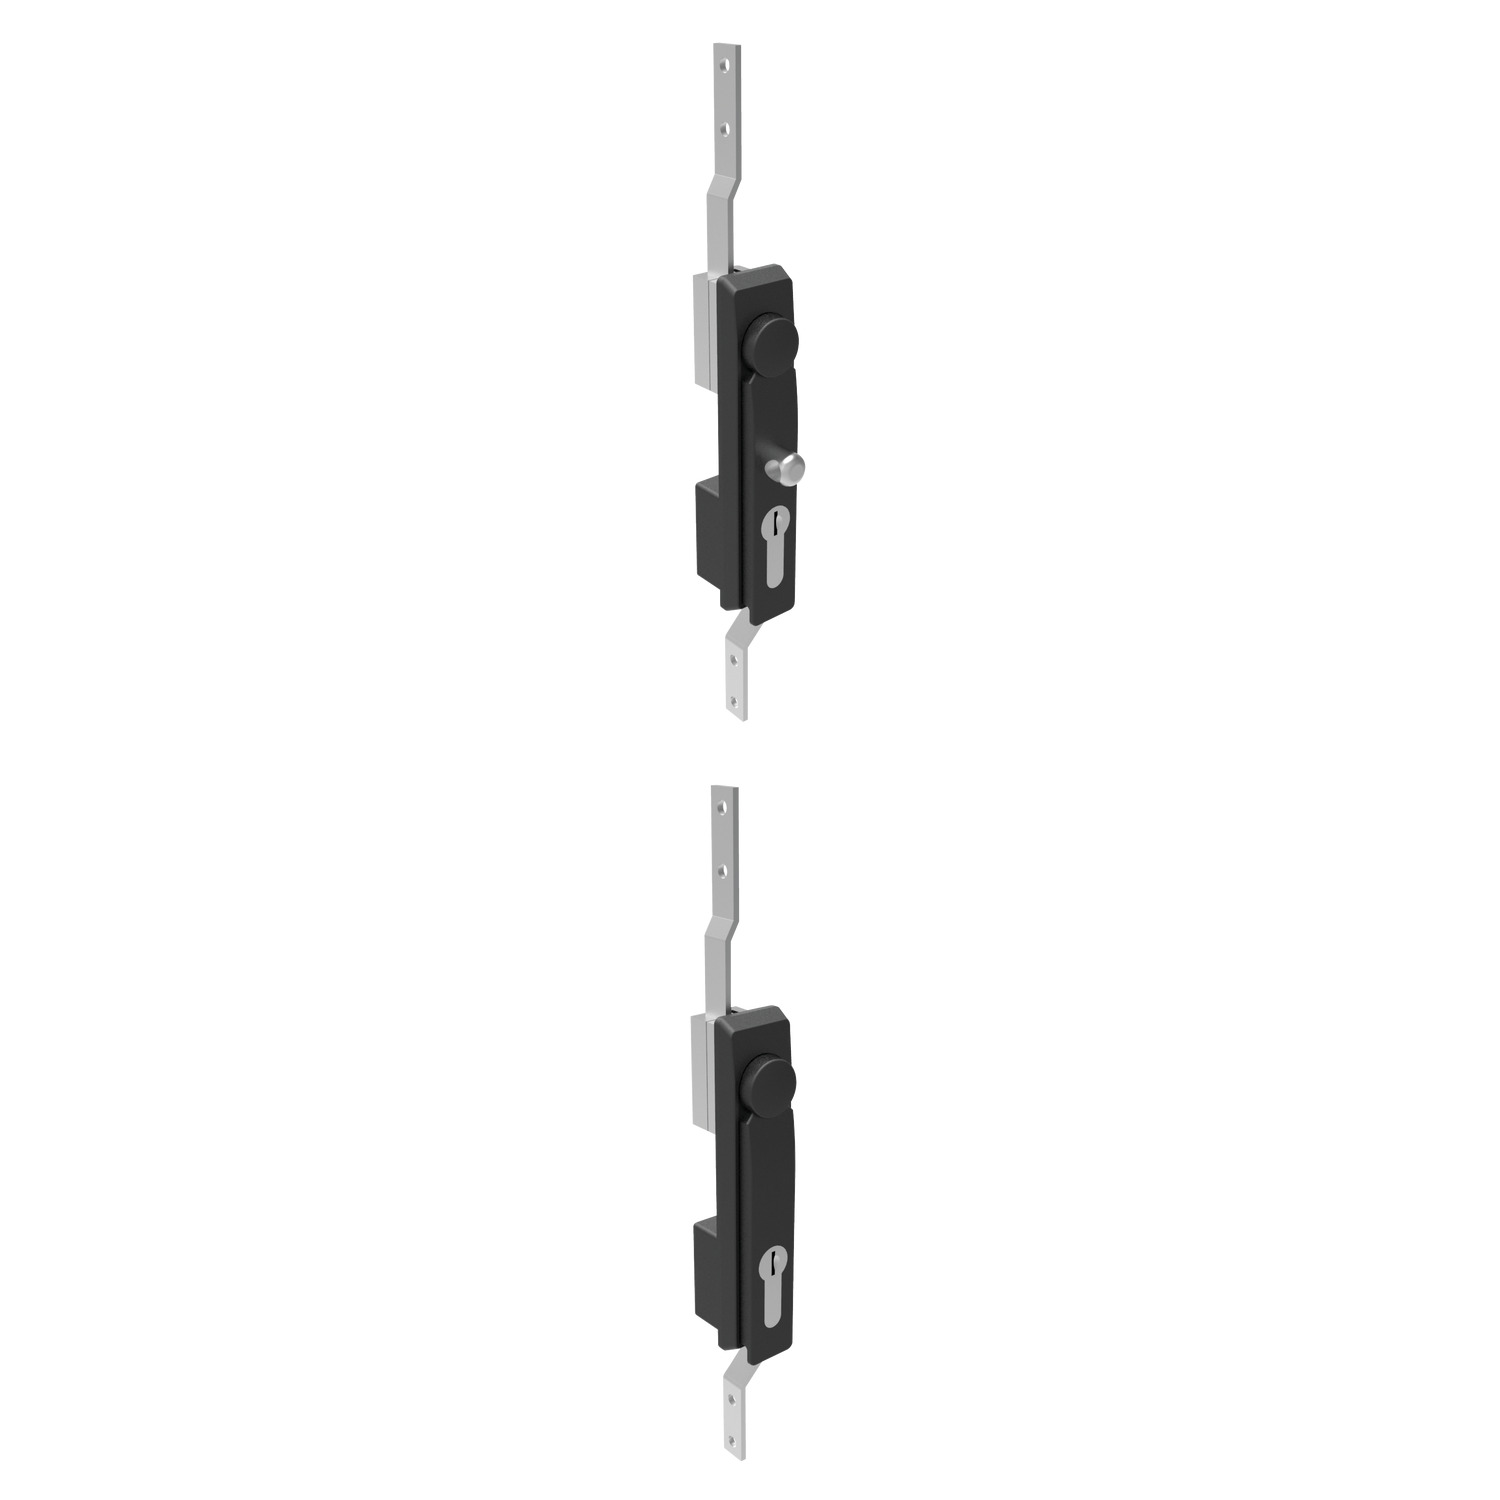 B2088.AW0320 Swing Handles with 3 point latching,  rod control, plastic